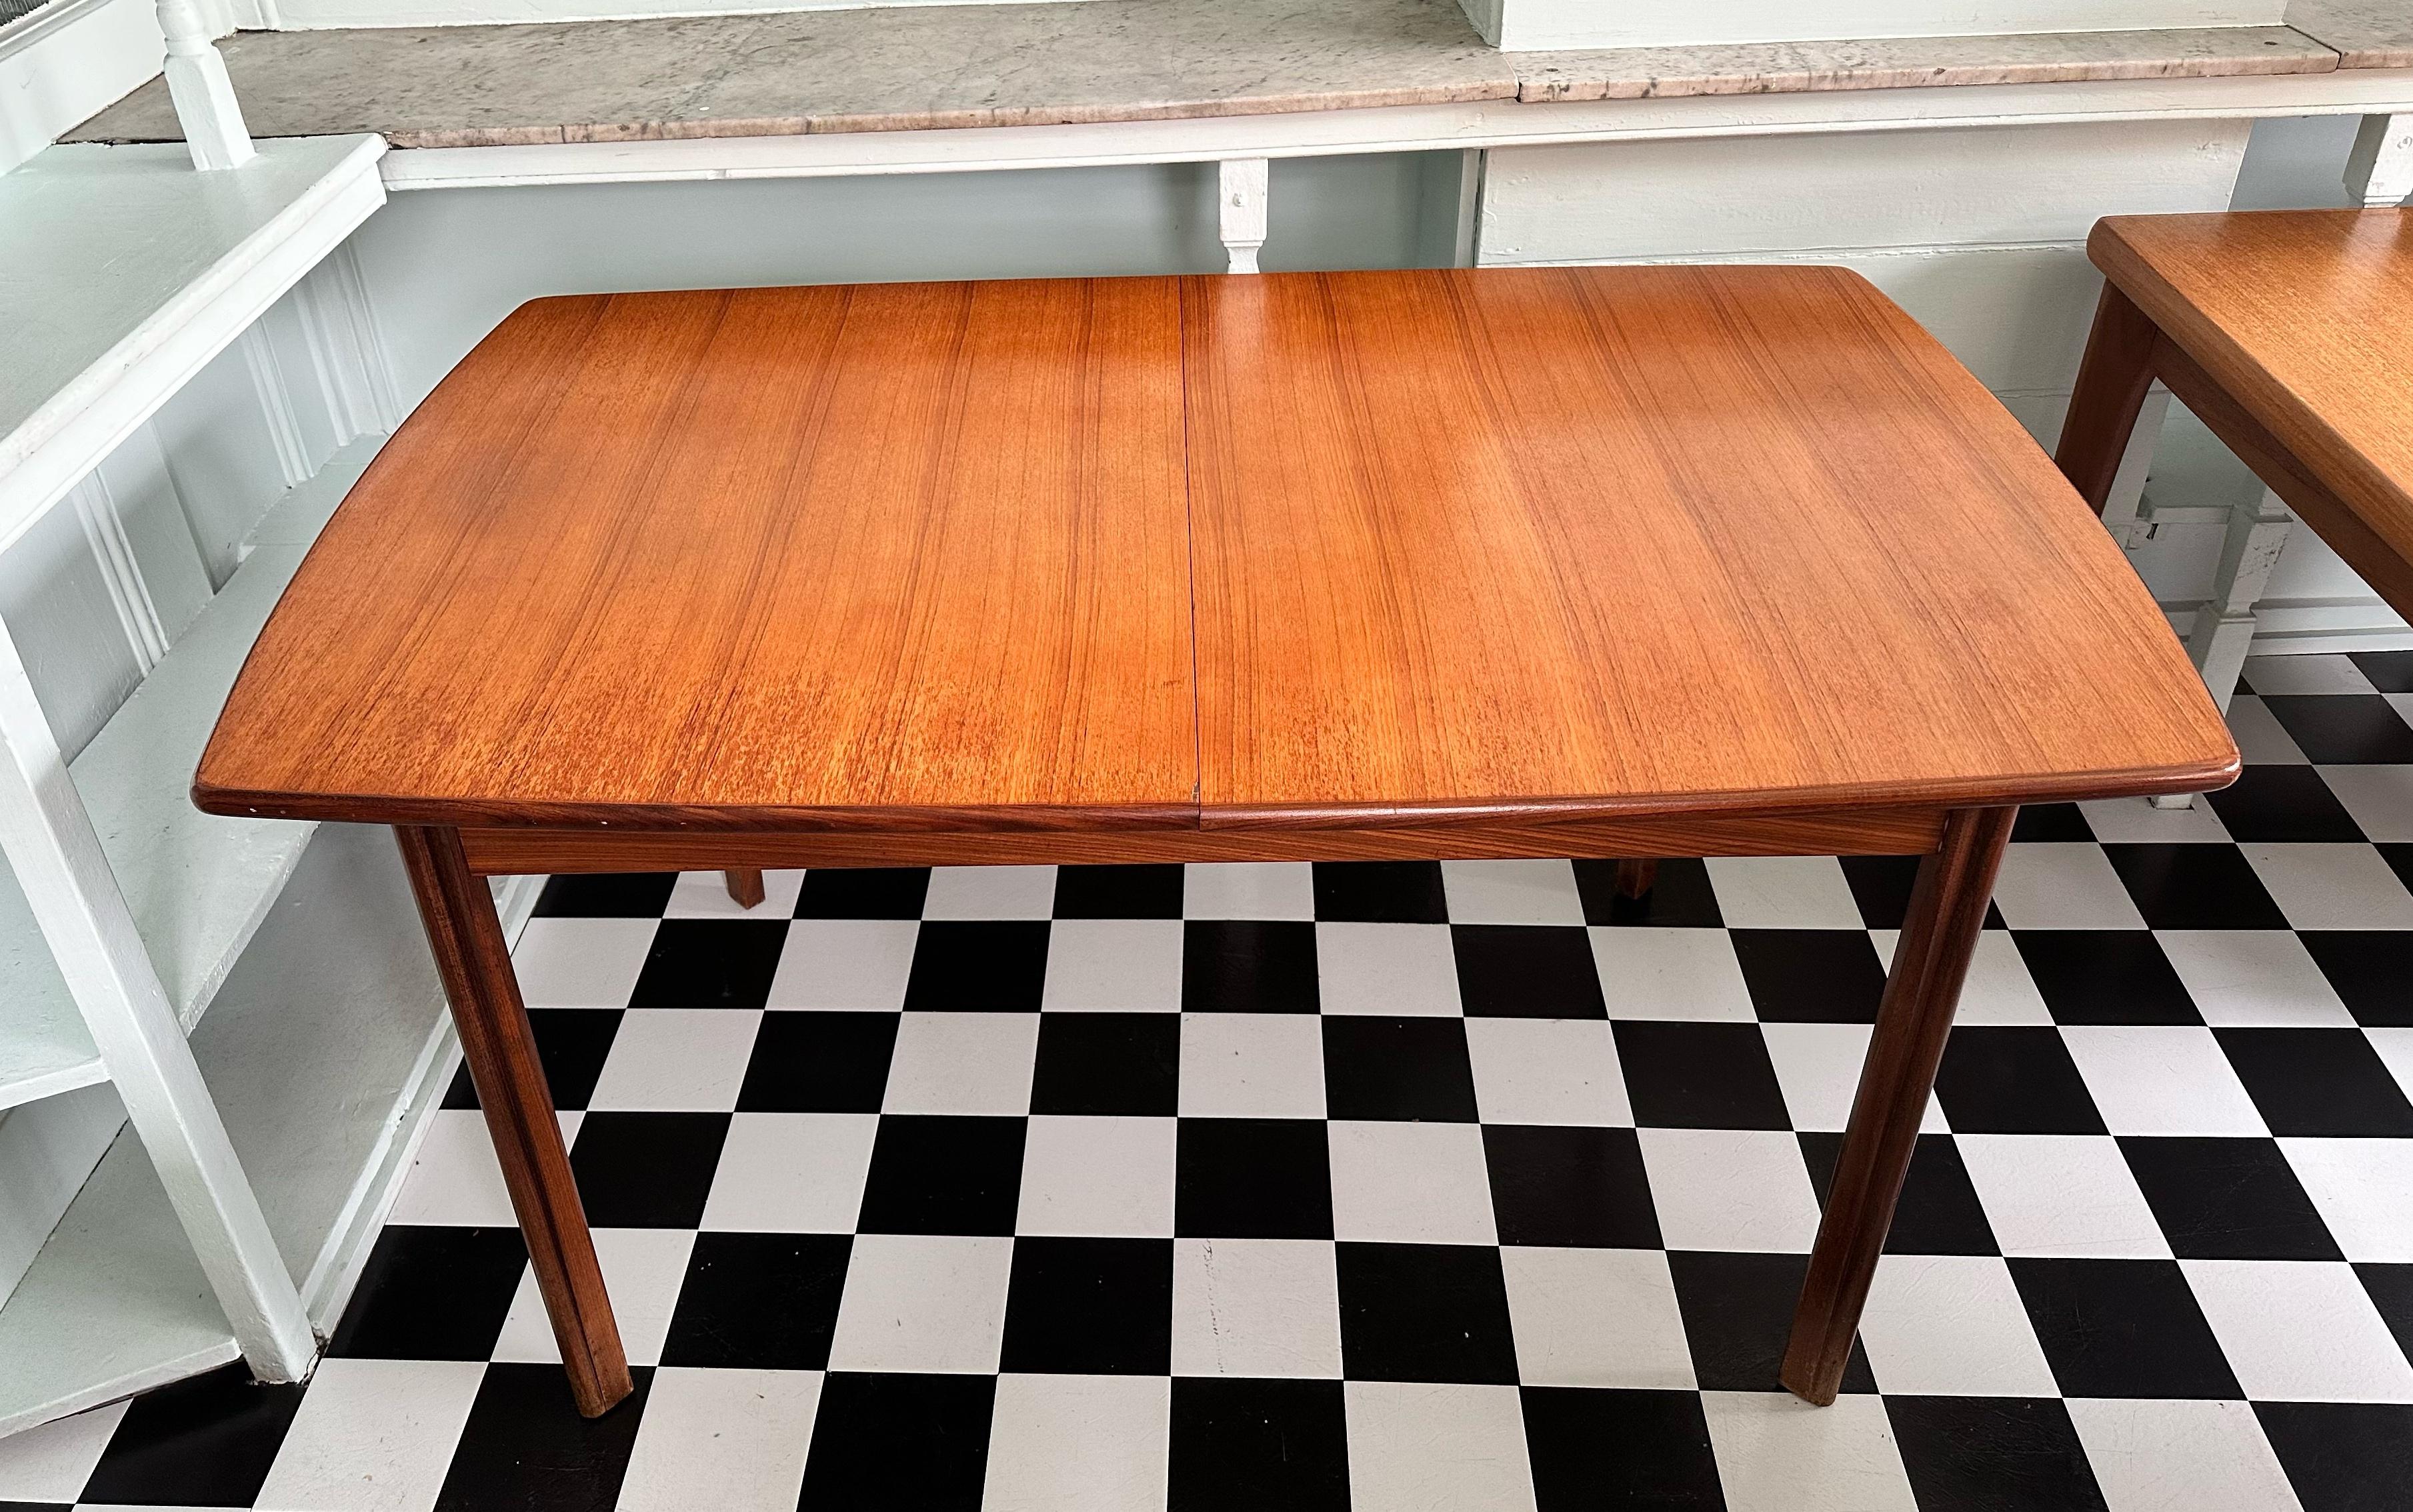 Beautiful mid-century modern teak rectangular extendable dining table. Having one butterfly extension (which is kept underneath the main two leaves when not in use), this table is very versatile. It is comprised of very stylish legs and an amazing